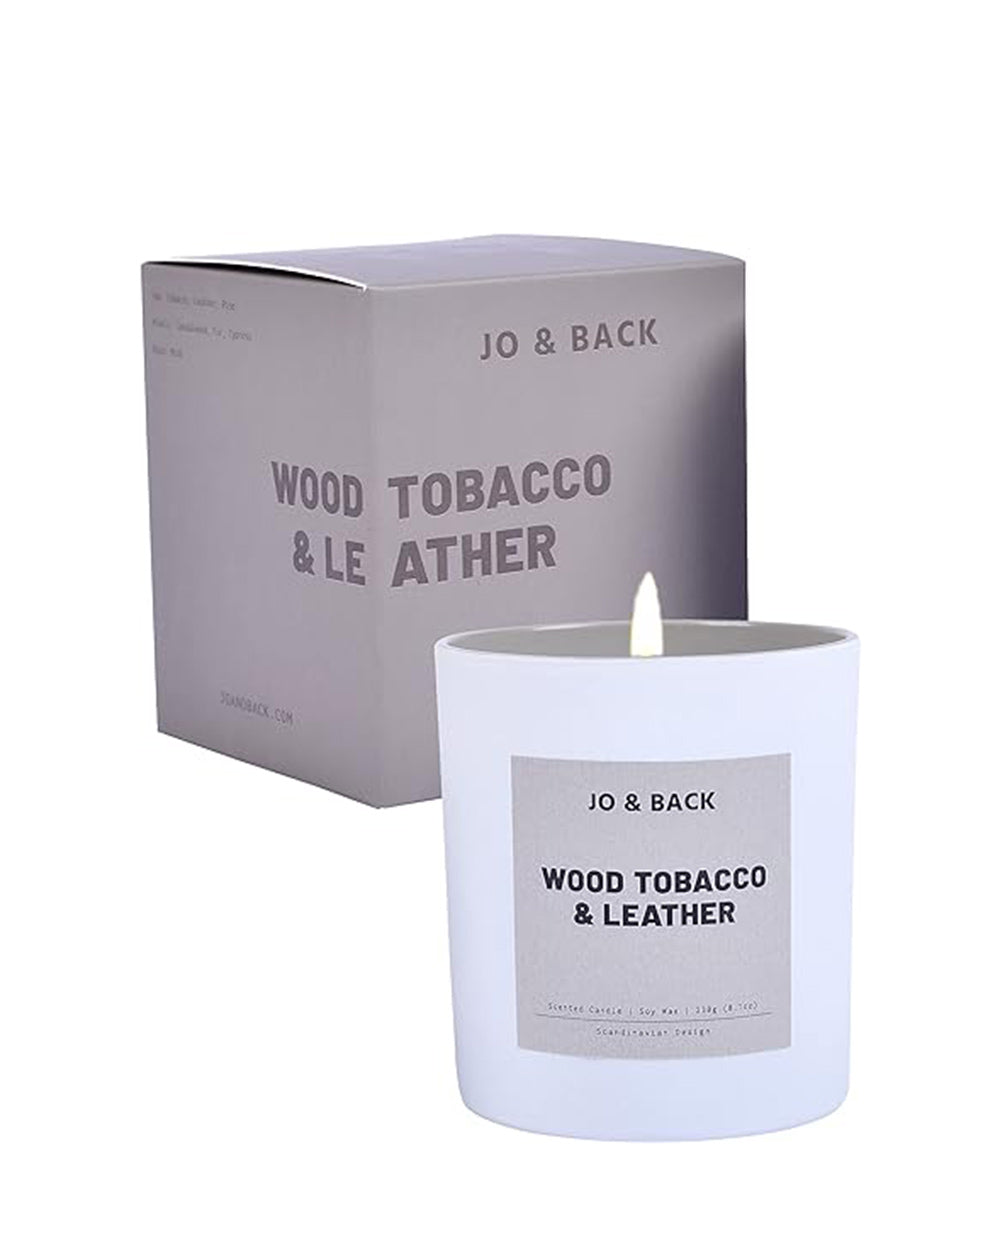 Jo & Back Wood Tobacco & Leather Scented Soy Wax Candle